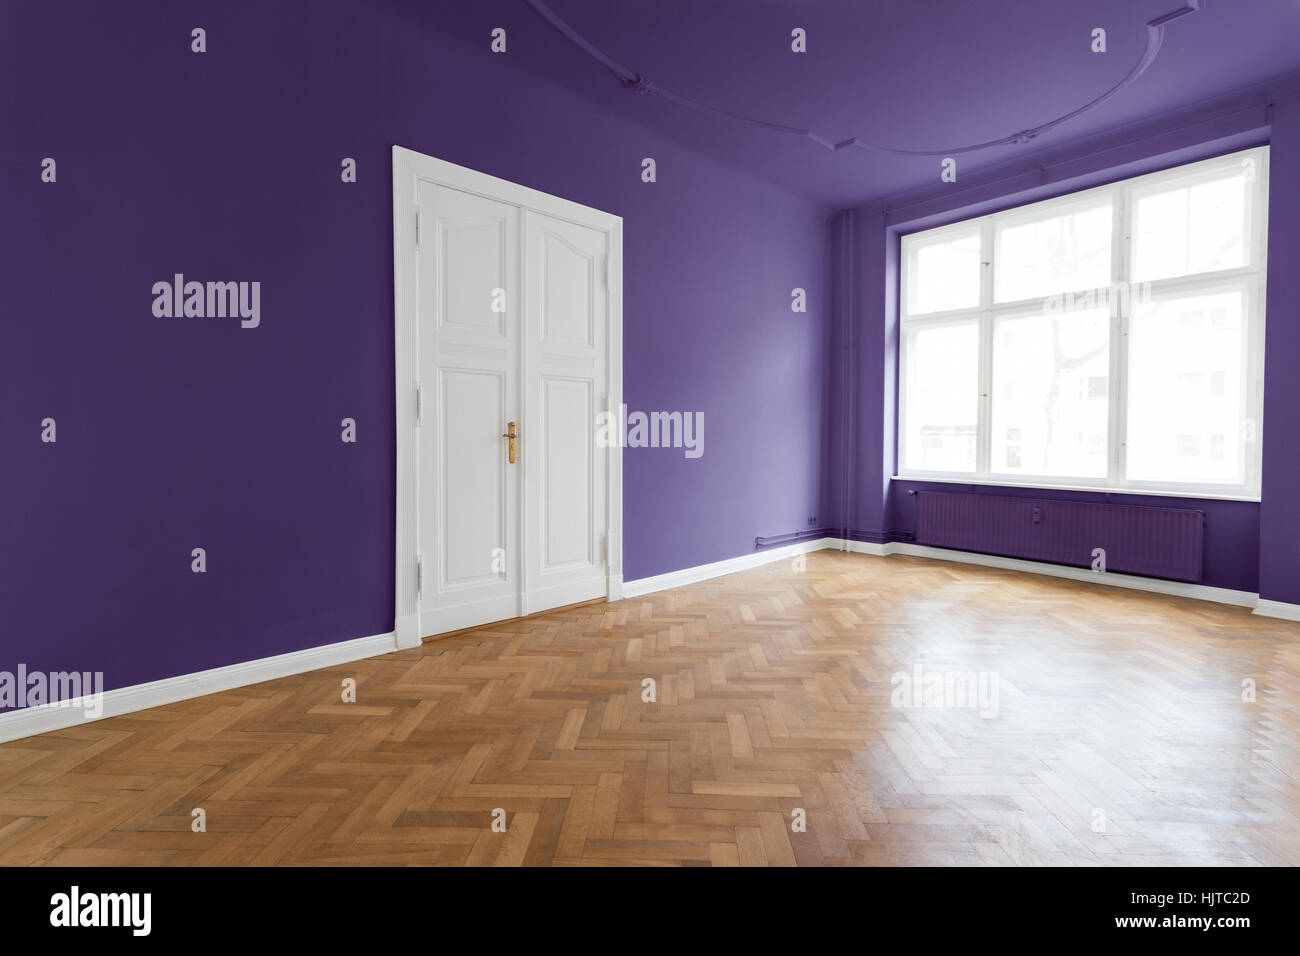 real estate interior, apartment with purple walls Stock Photo